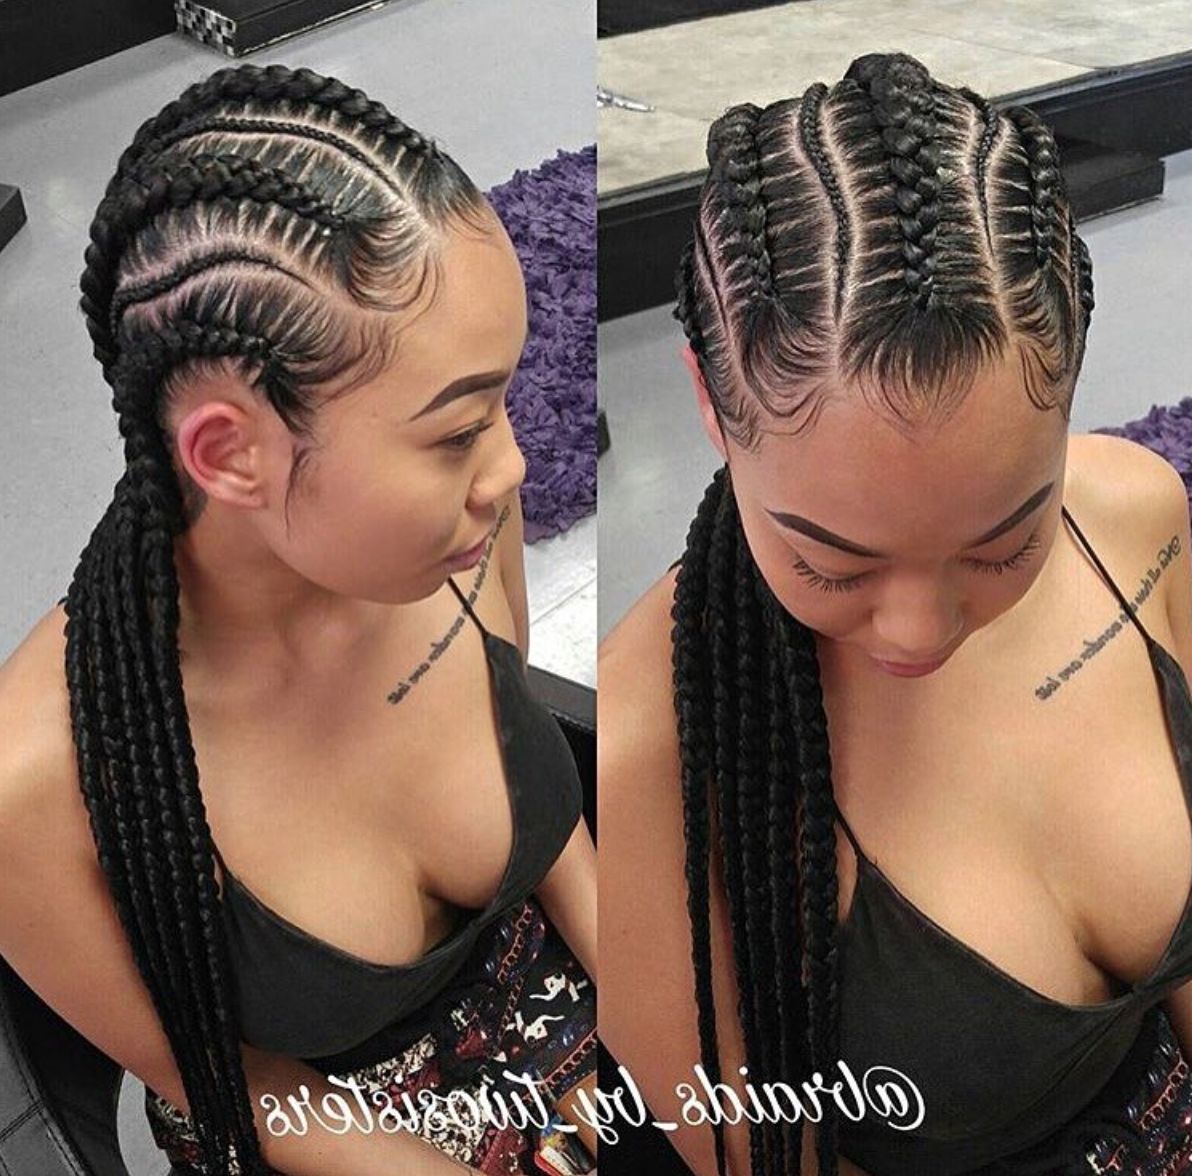 Widely Used Asymmetrical Goddess Braids Hairstyles In Asymmetrical Hair Idea Around Braid Styles With Weave – Fantaziranje (View 6 of 15)